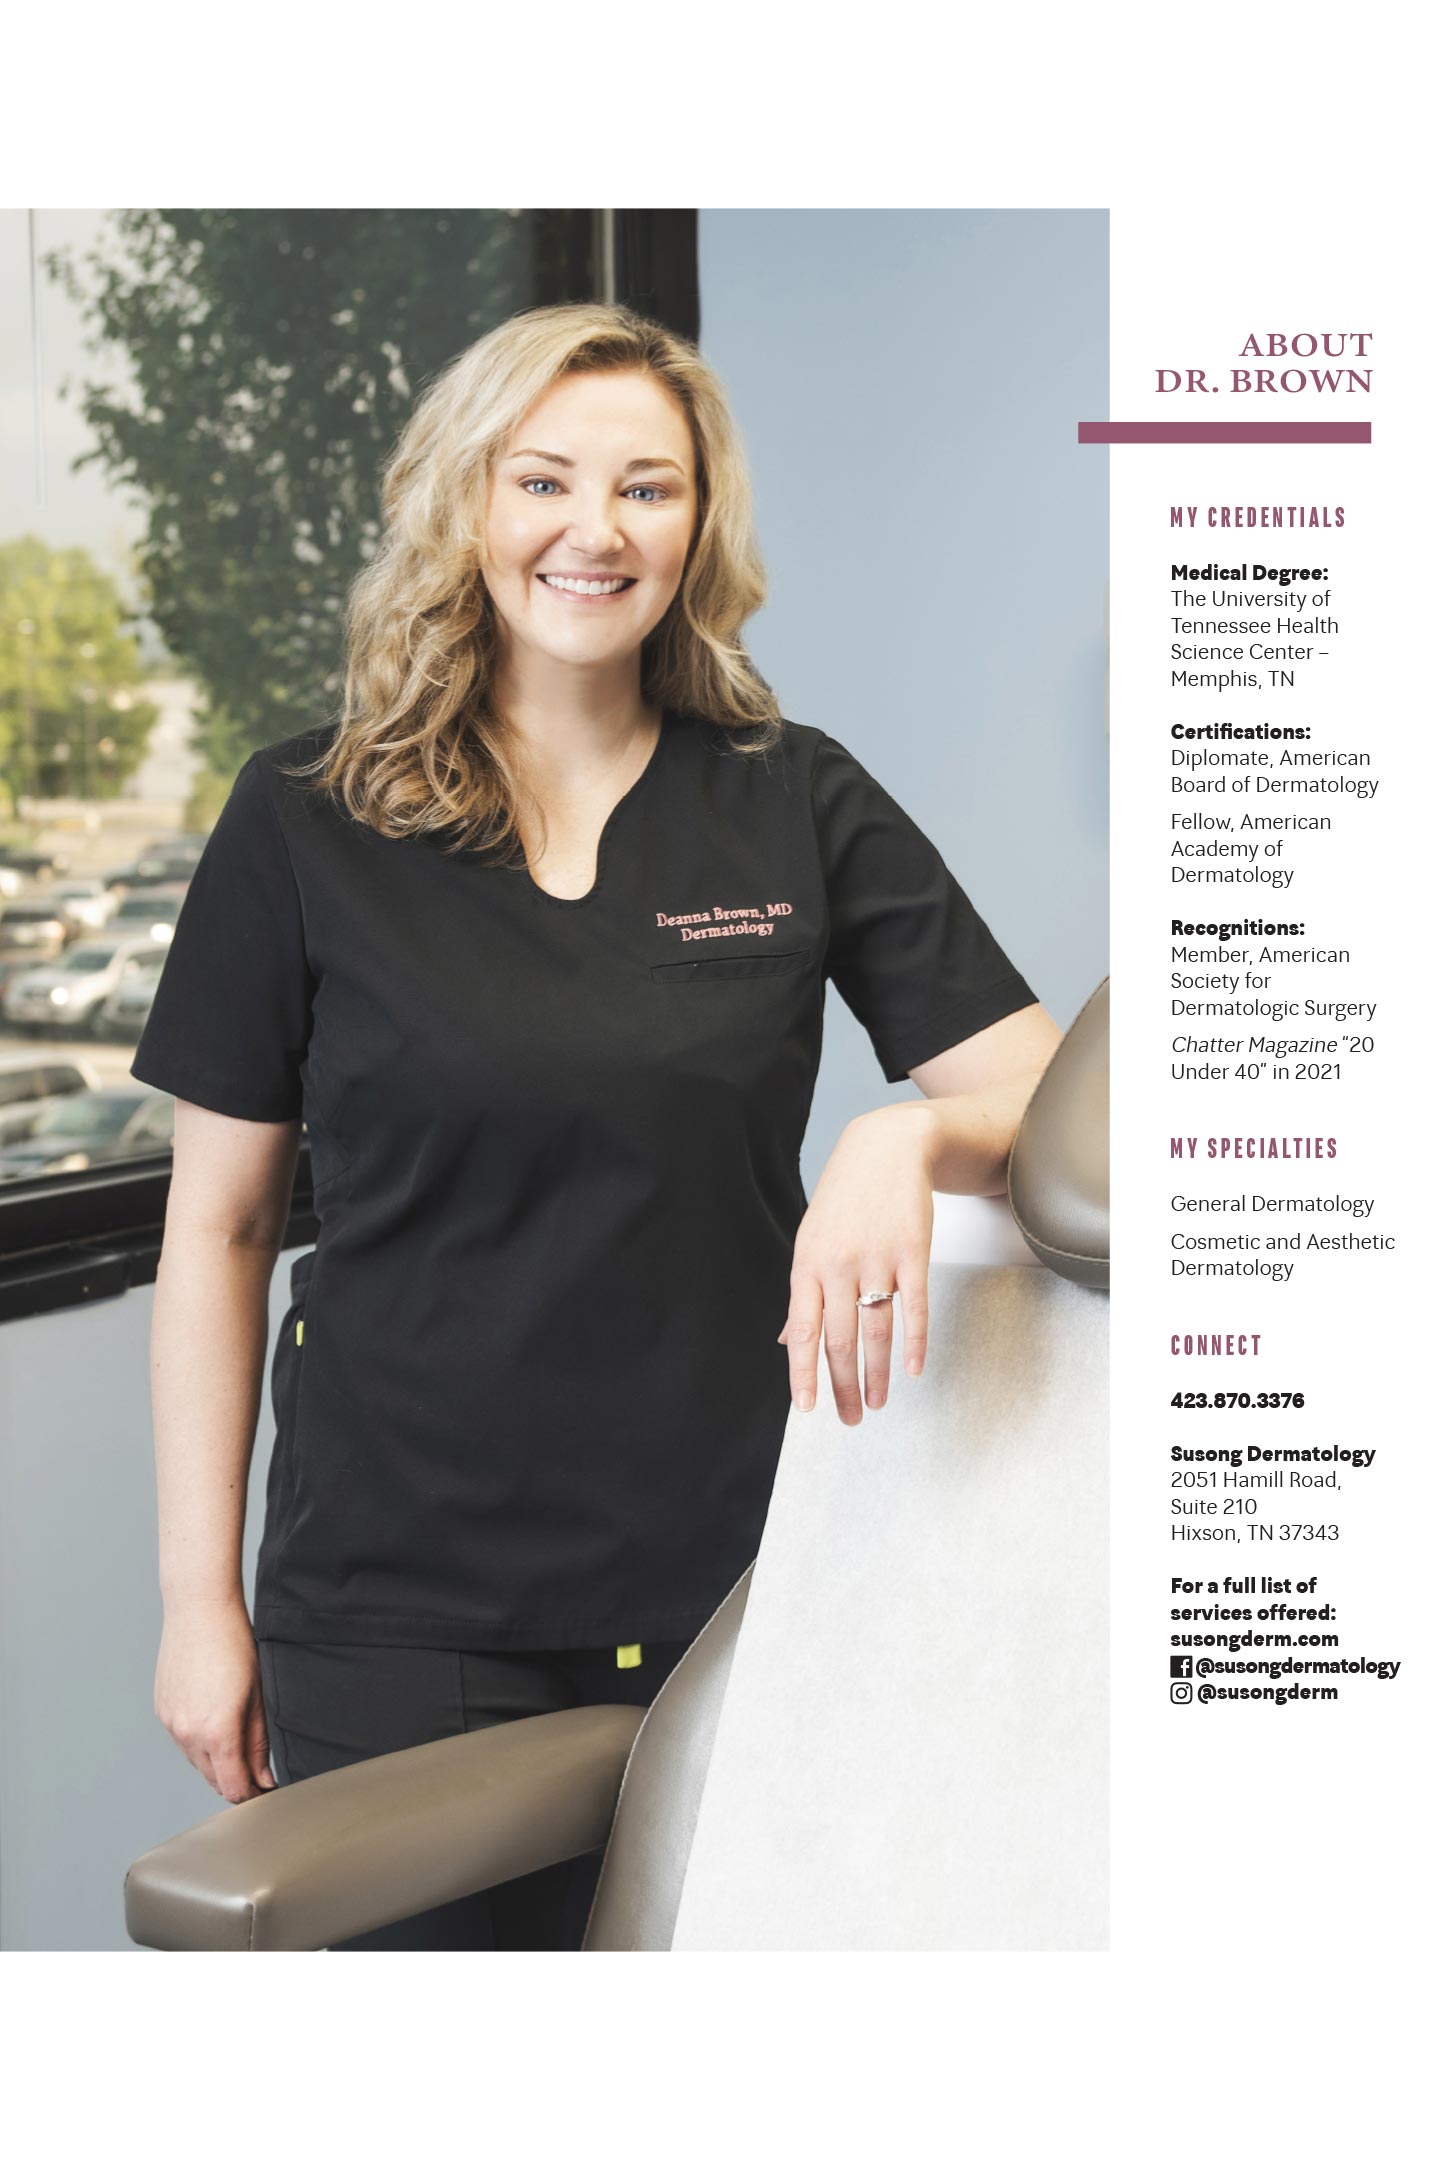 About Dr. Deanna Brown at Susong Dermatology